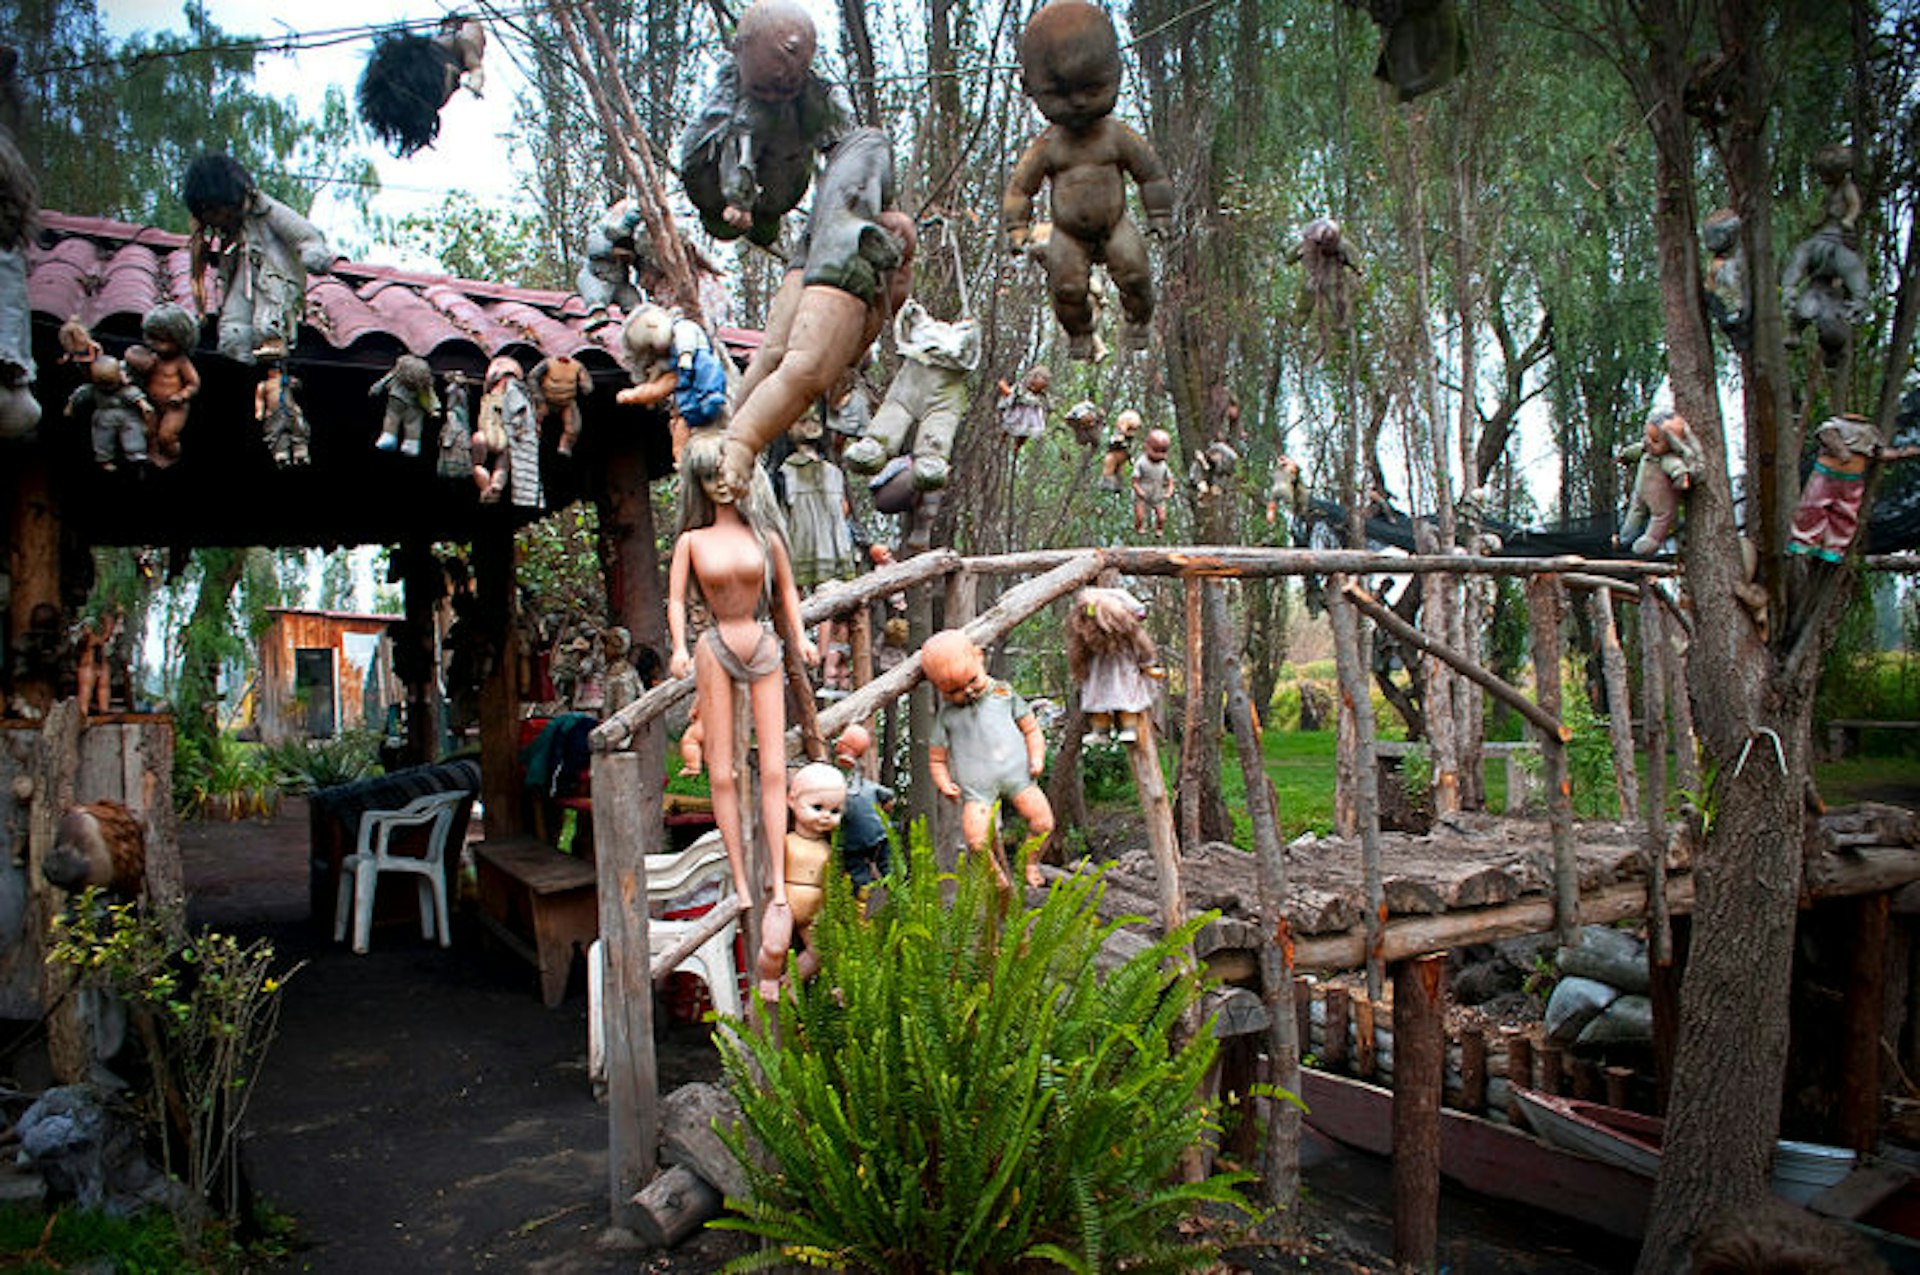 Creepy dolls welcome you to their island home. Image by John Hecht / Lonely Planet